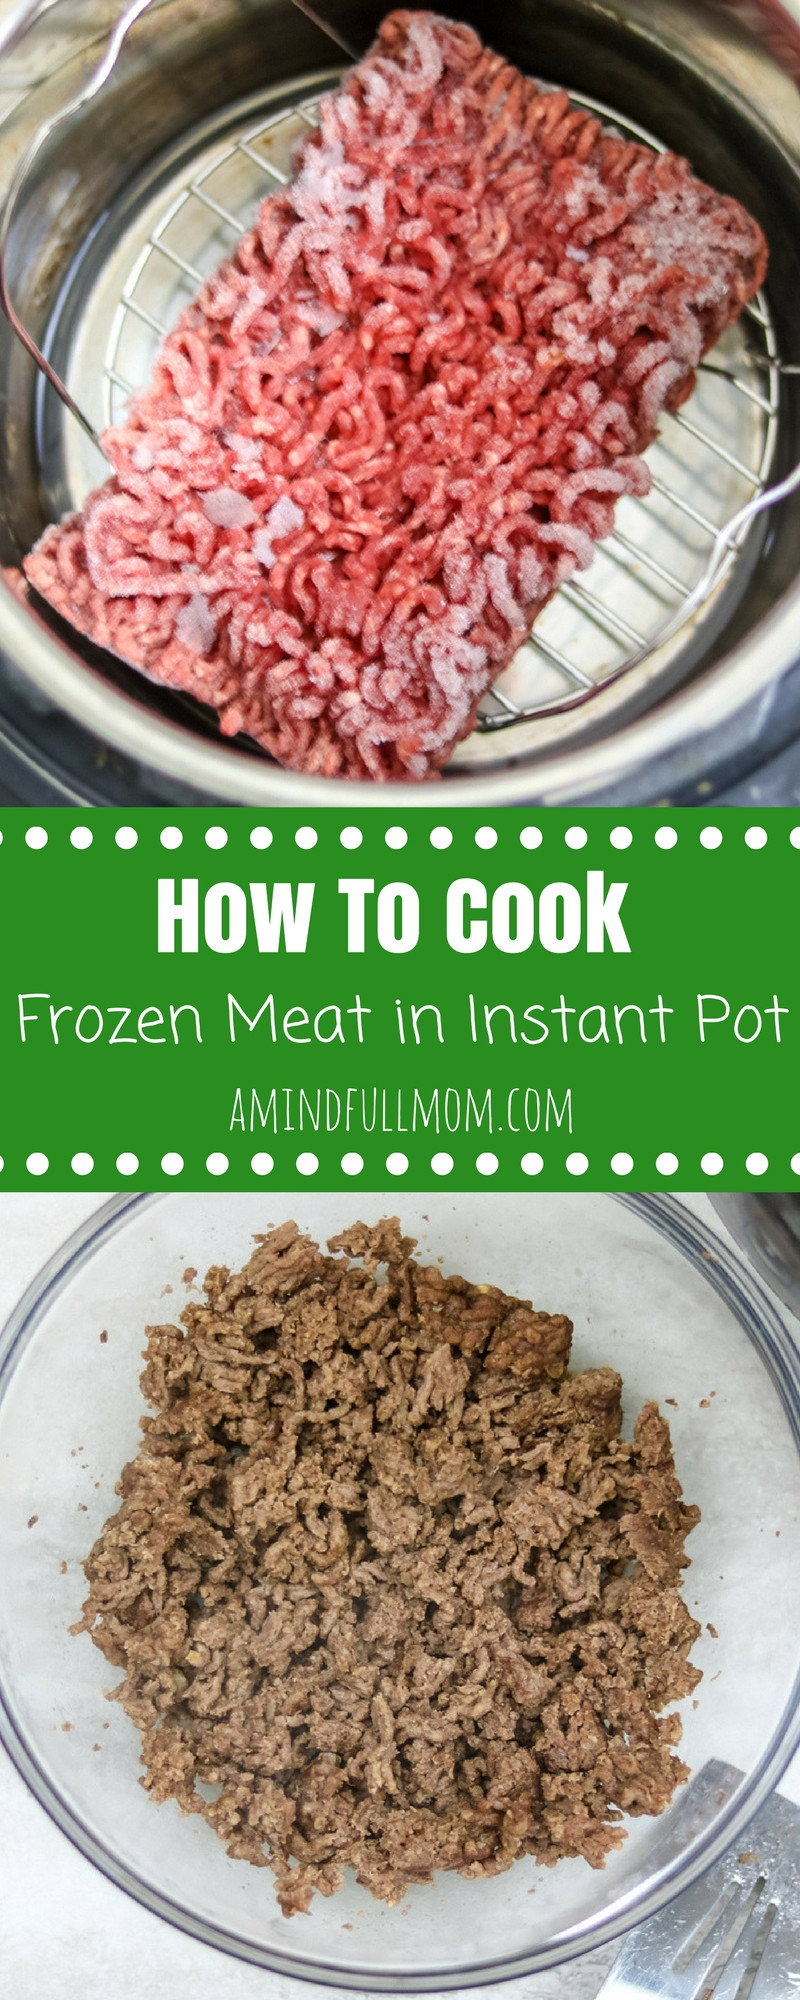 What To Cook With Ground Beef
 How to Cook Ground Beef in Instant Pot